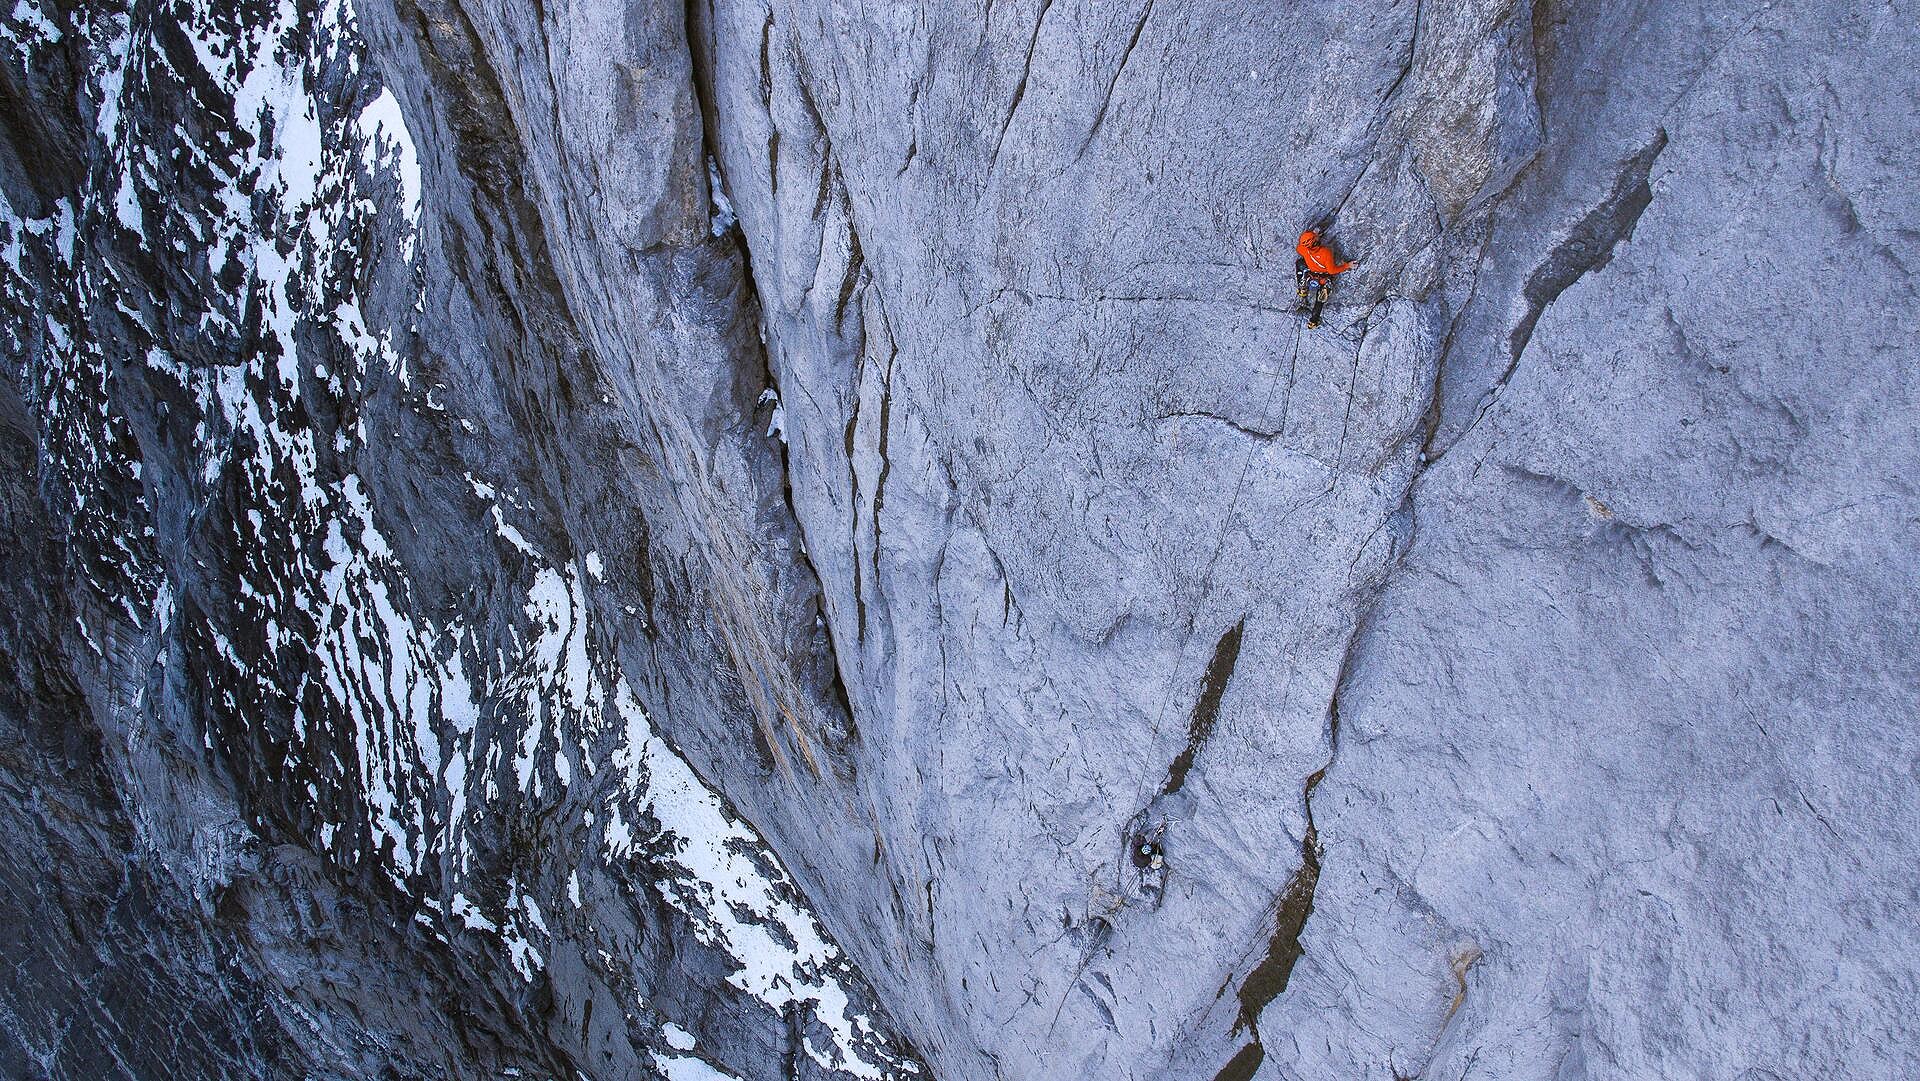 Jacopo on pitch 22 (7a+)  © Alpsolut Pictures